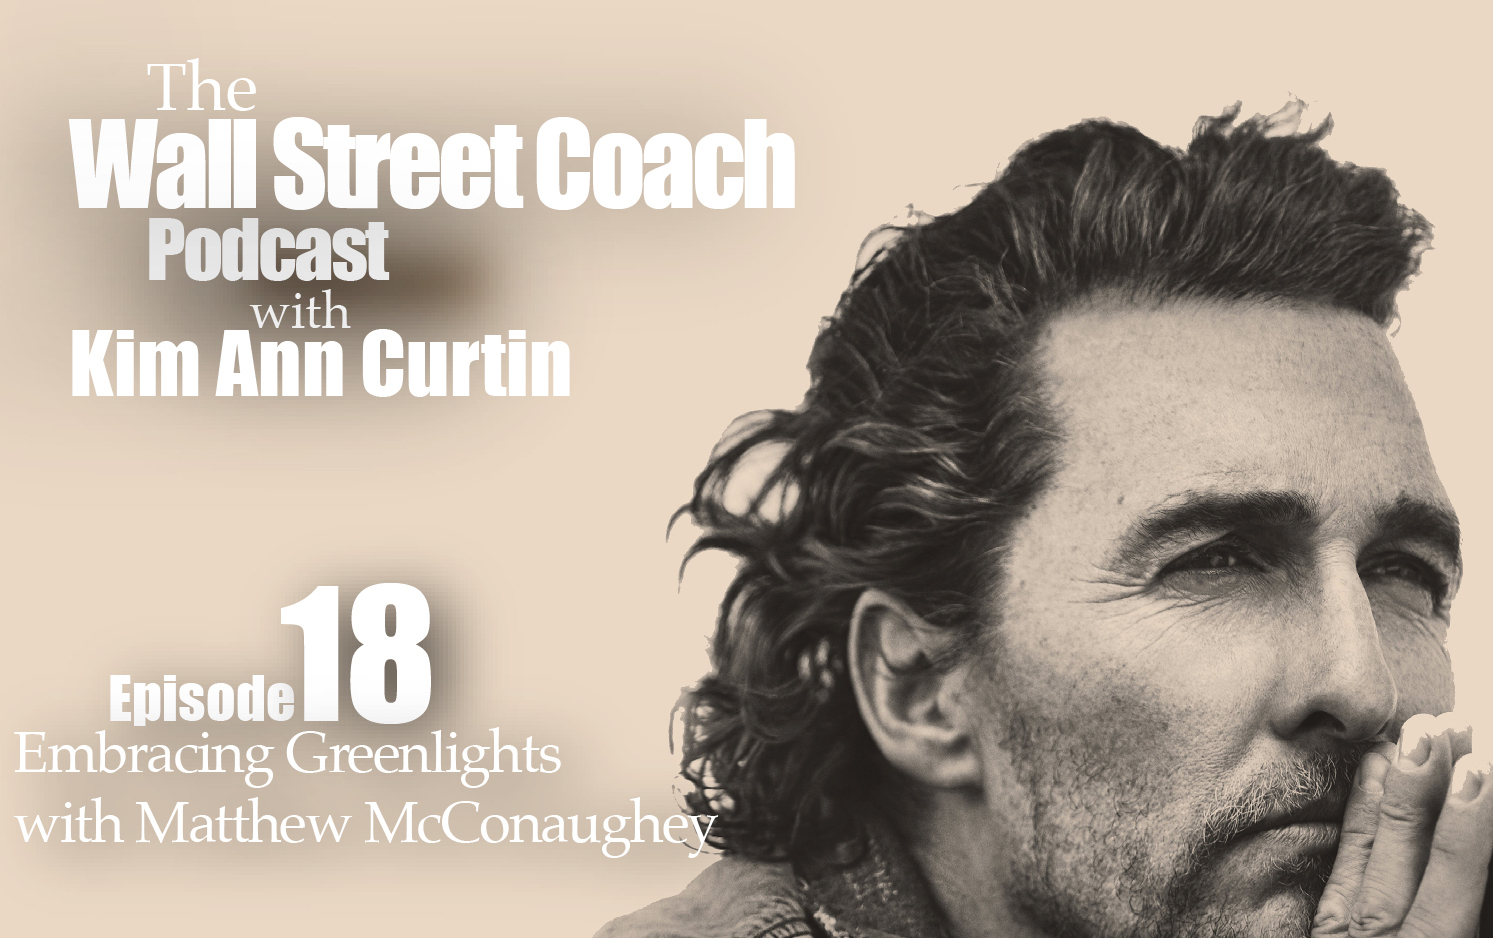 Matthew McConaughey Embracing Greenlights interview with Kim Ann Curtin The Wall Street Coach